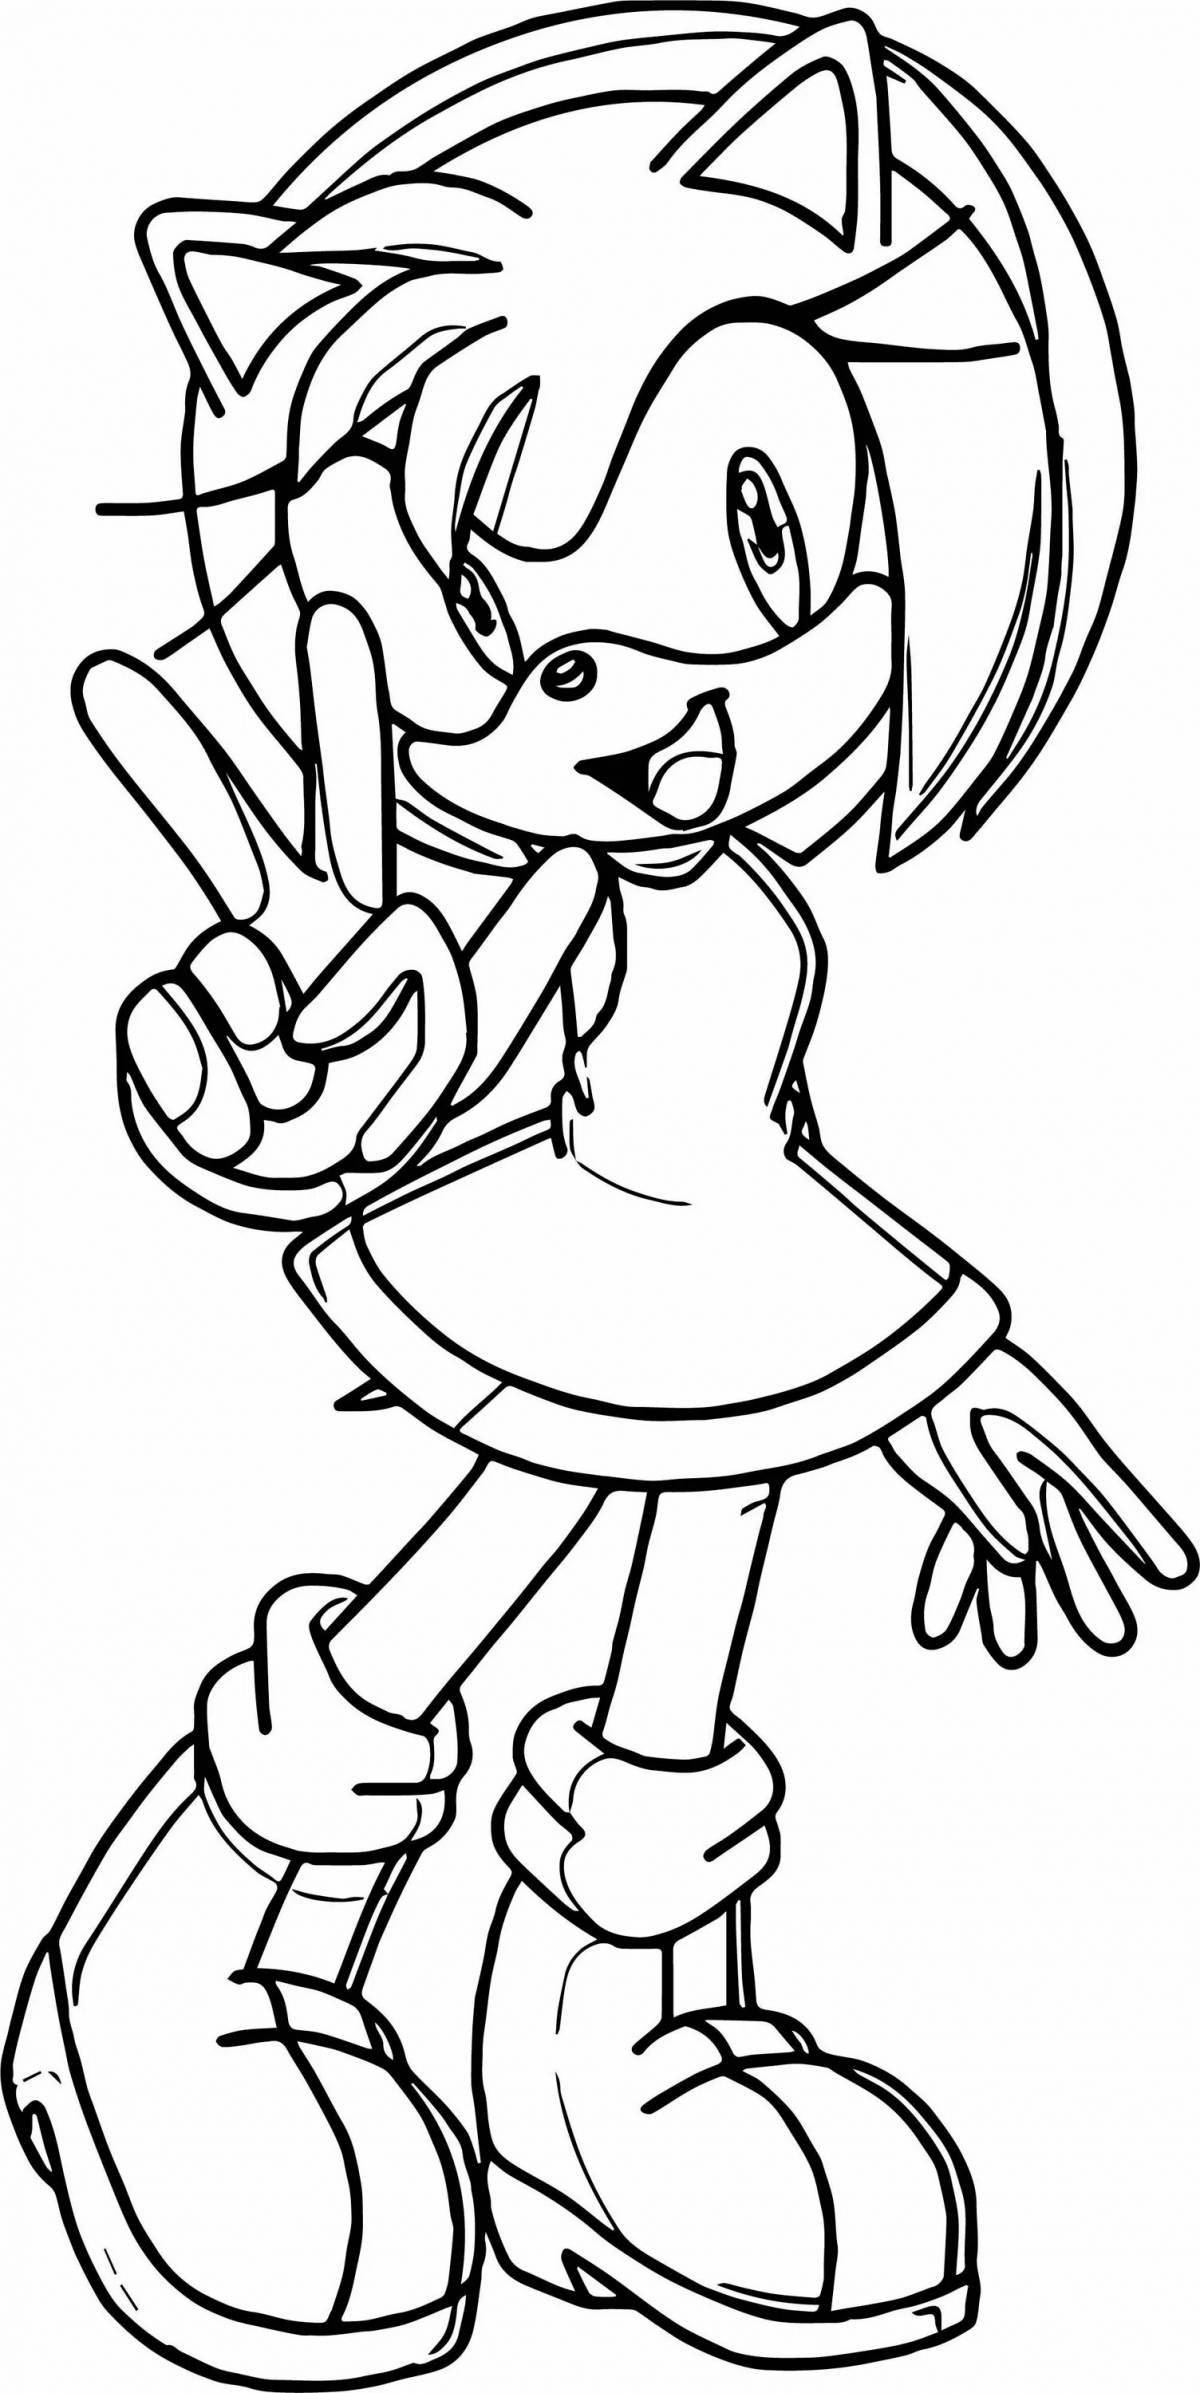 Sonic and amy rose shining coloring book